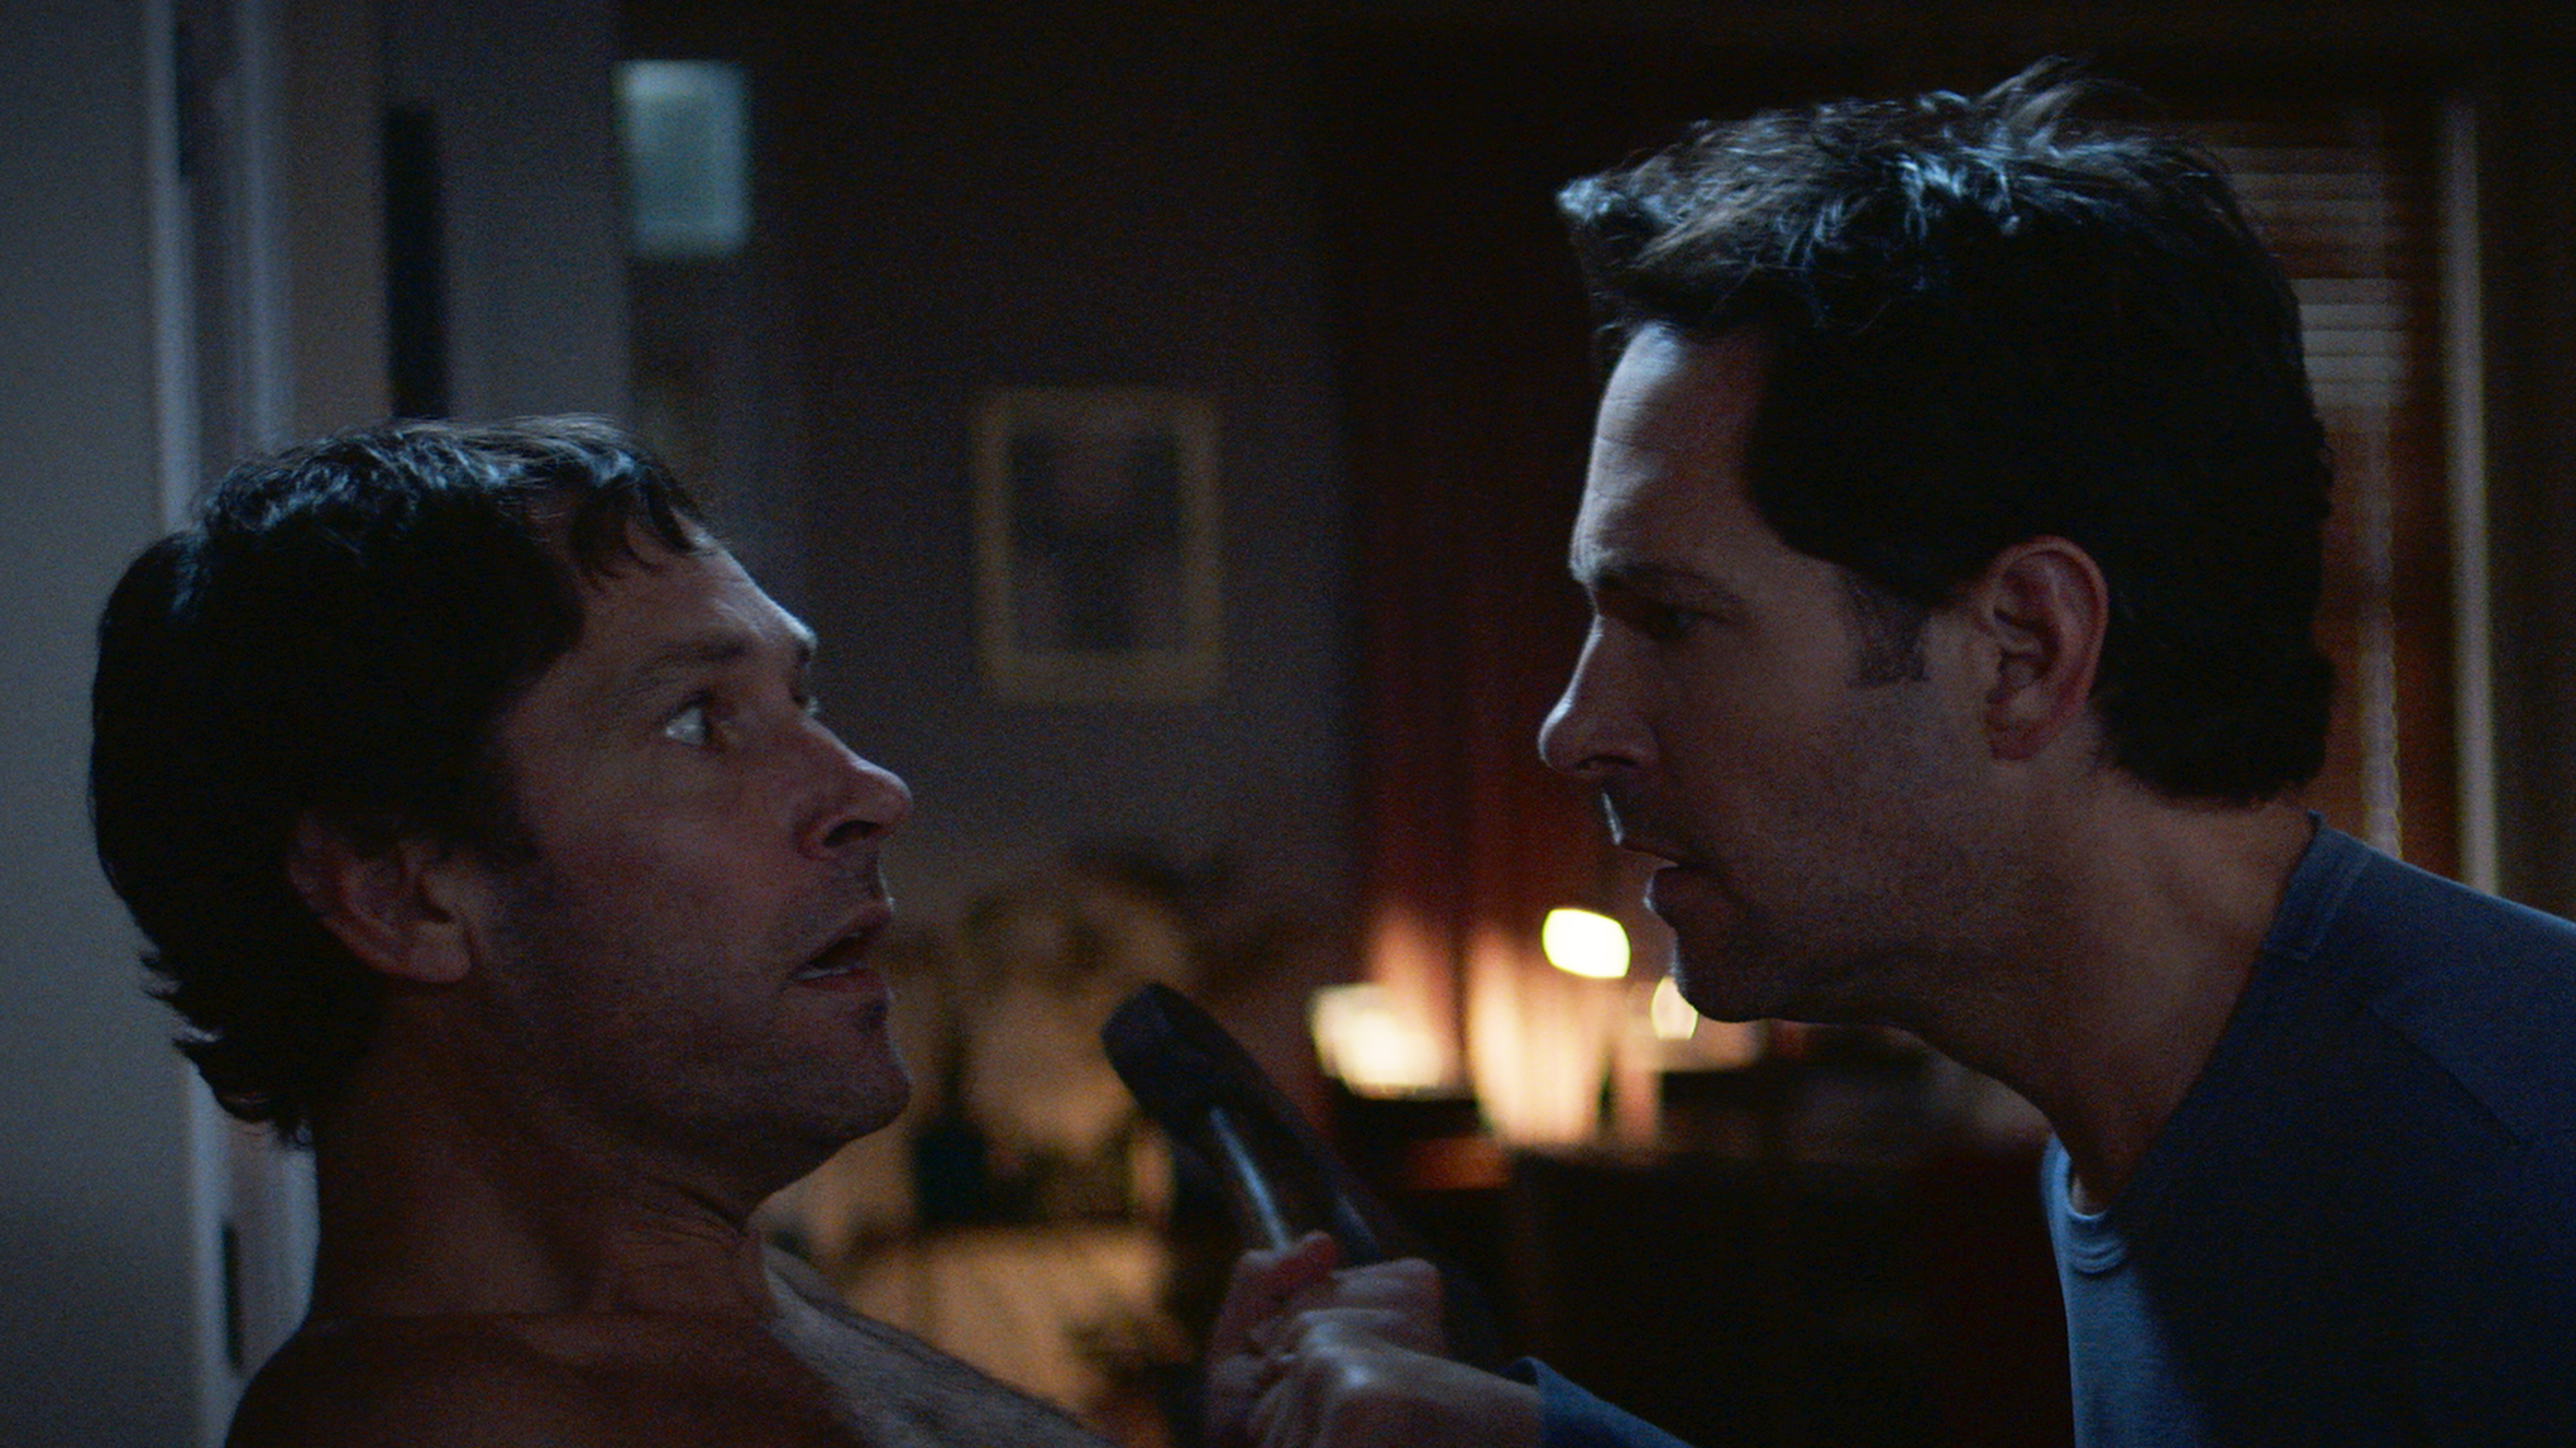 Paul Rudd (left) and Paul Rudd (right) in 'Living With Yourself' (Netflix)